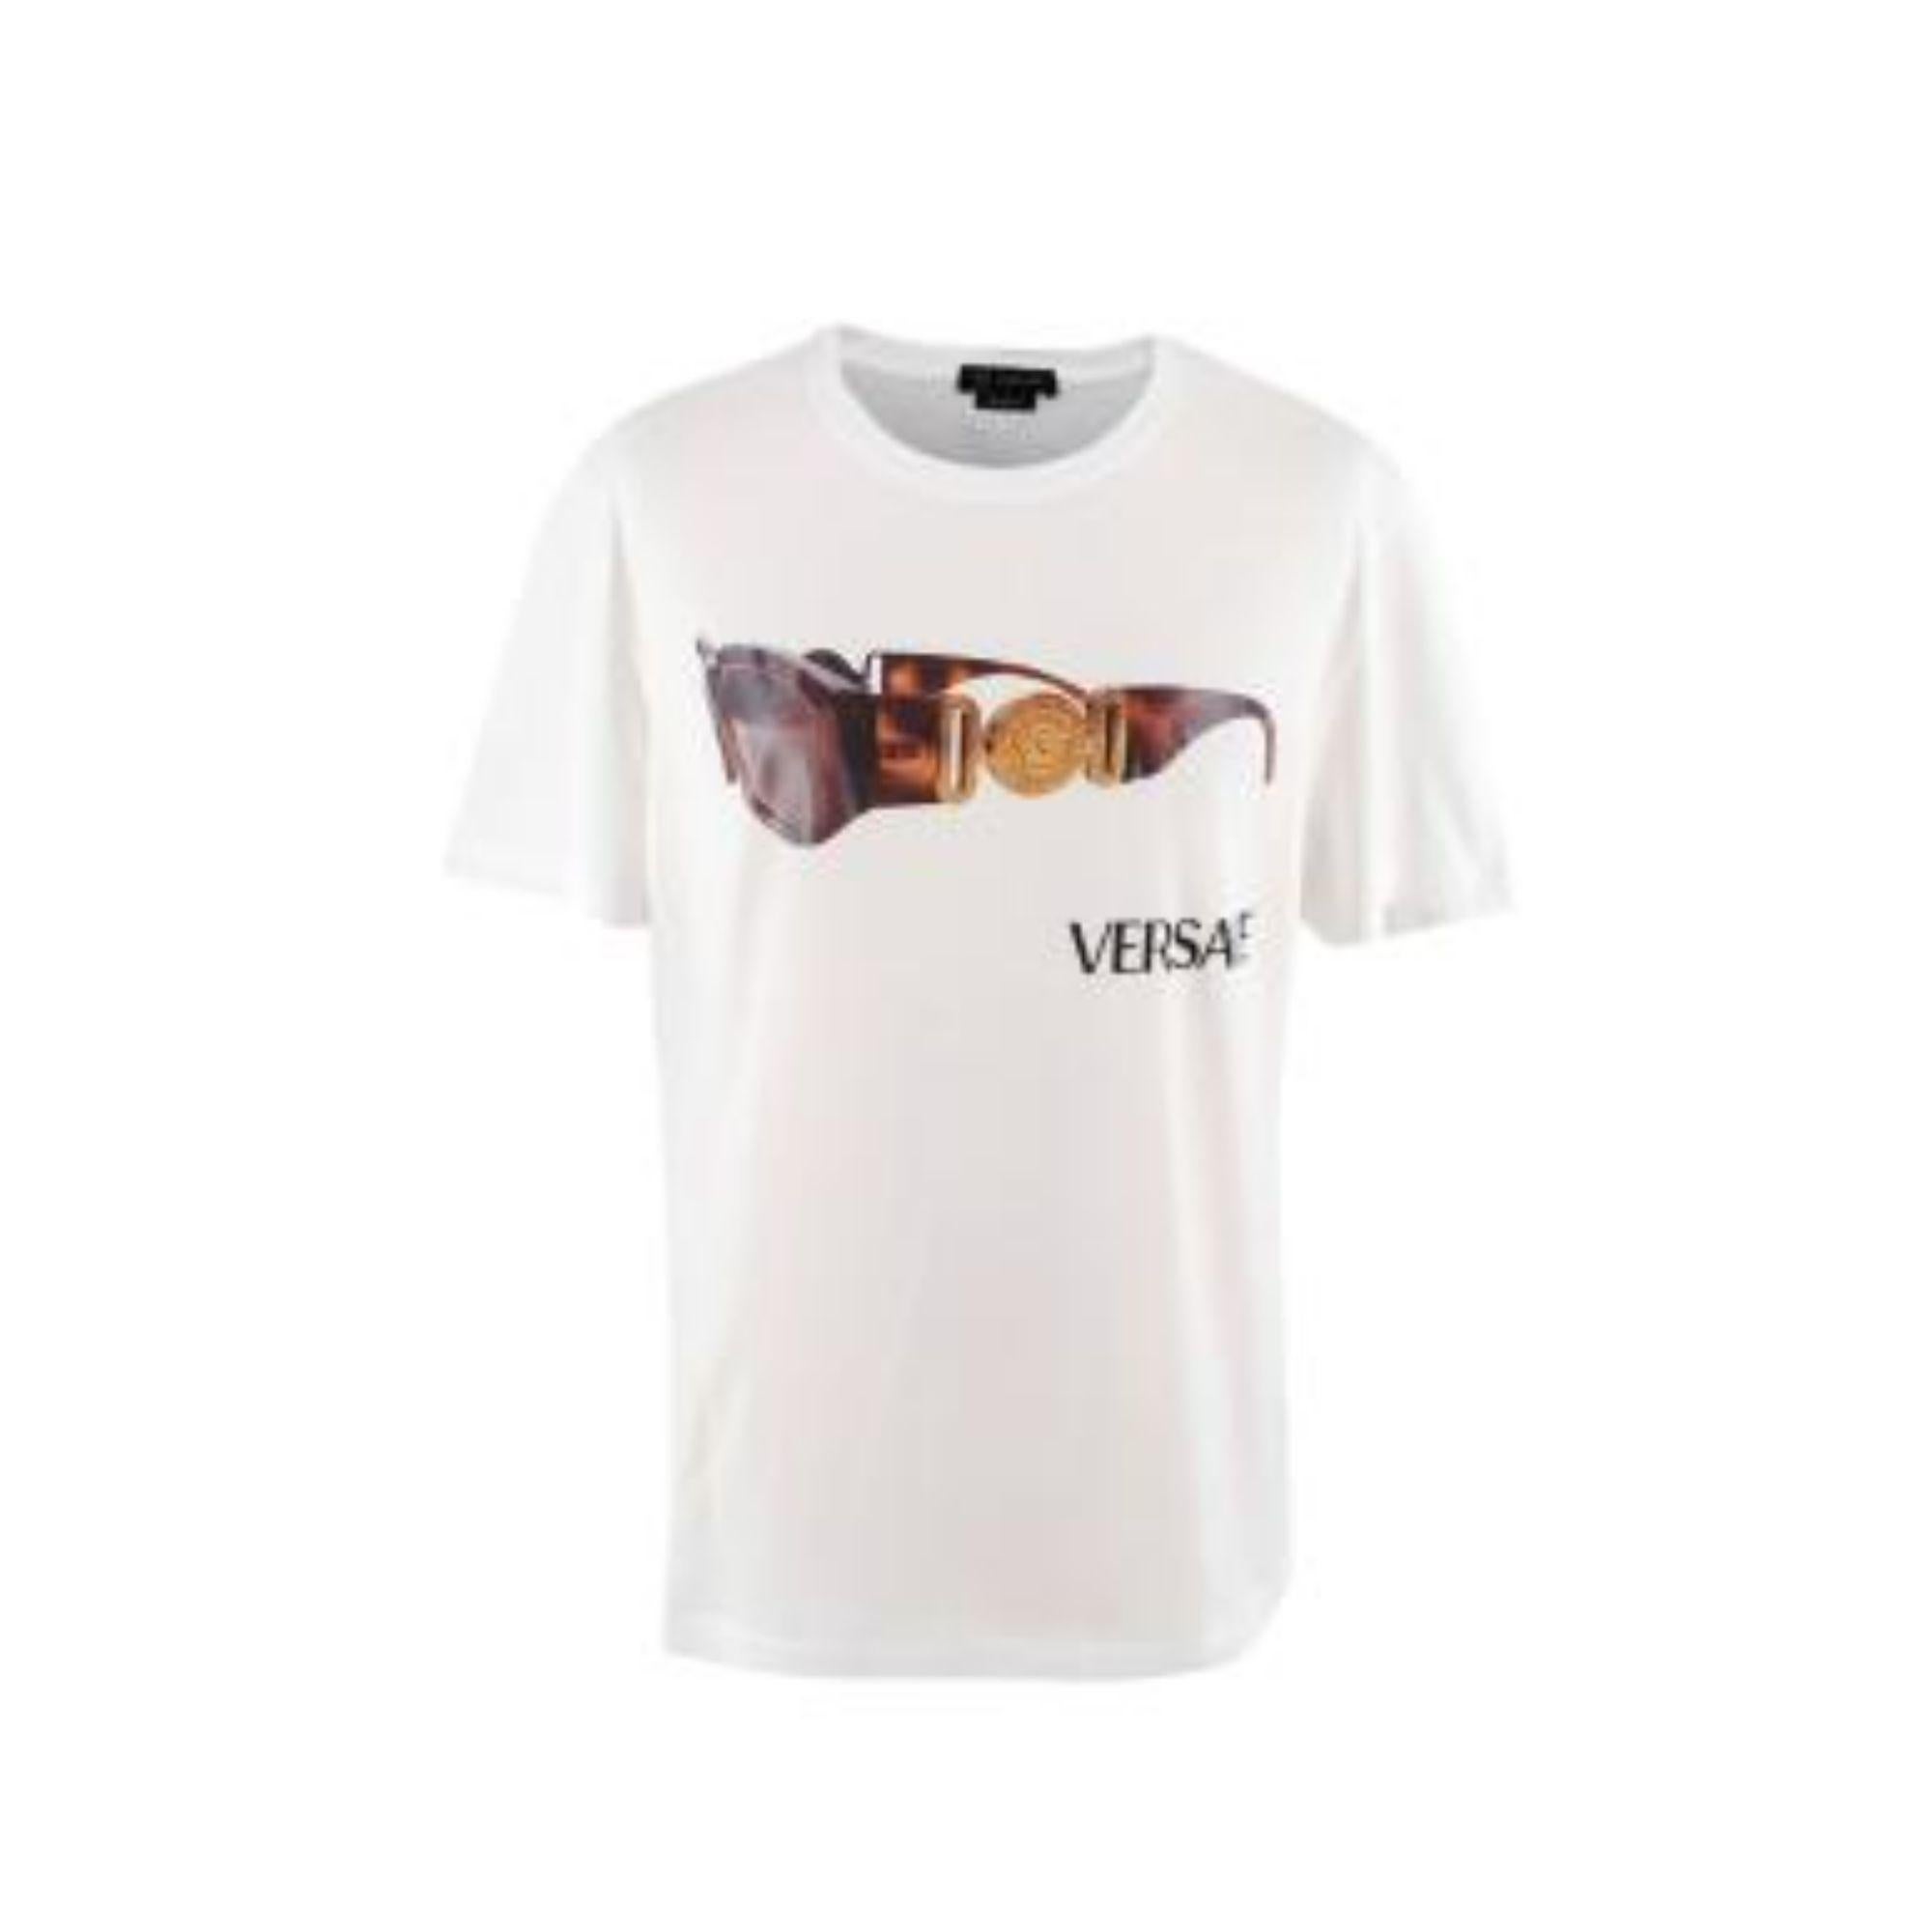 Versace White Sunglasses Print T-shirt

- Taylor fit
- Short sleeved
- Sunglasses front on chest
- Logo print

Material
100% Cotton

Made in Italy

PLEASE NOTE, THESE ITEMS ARE PRE-OWNED AND MAY SHOW SIGNS OF BEING STORED EVEN WHEN UNWORN AND